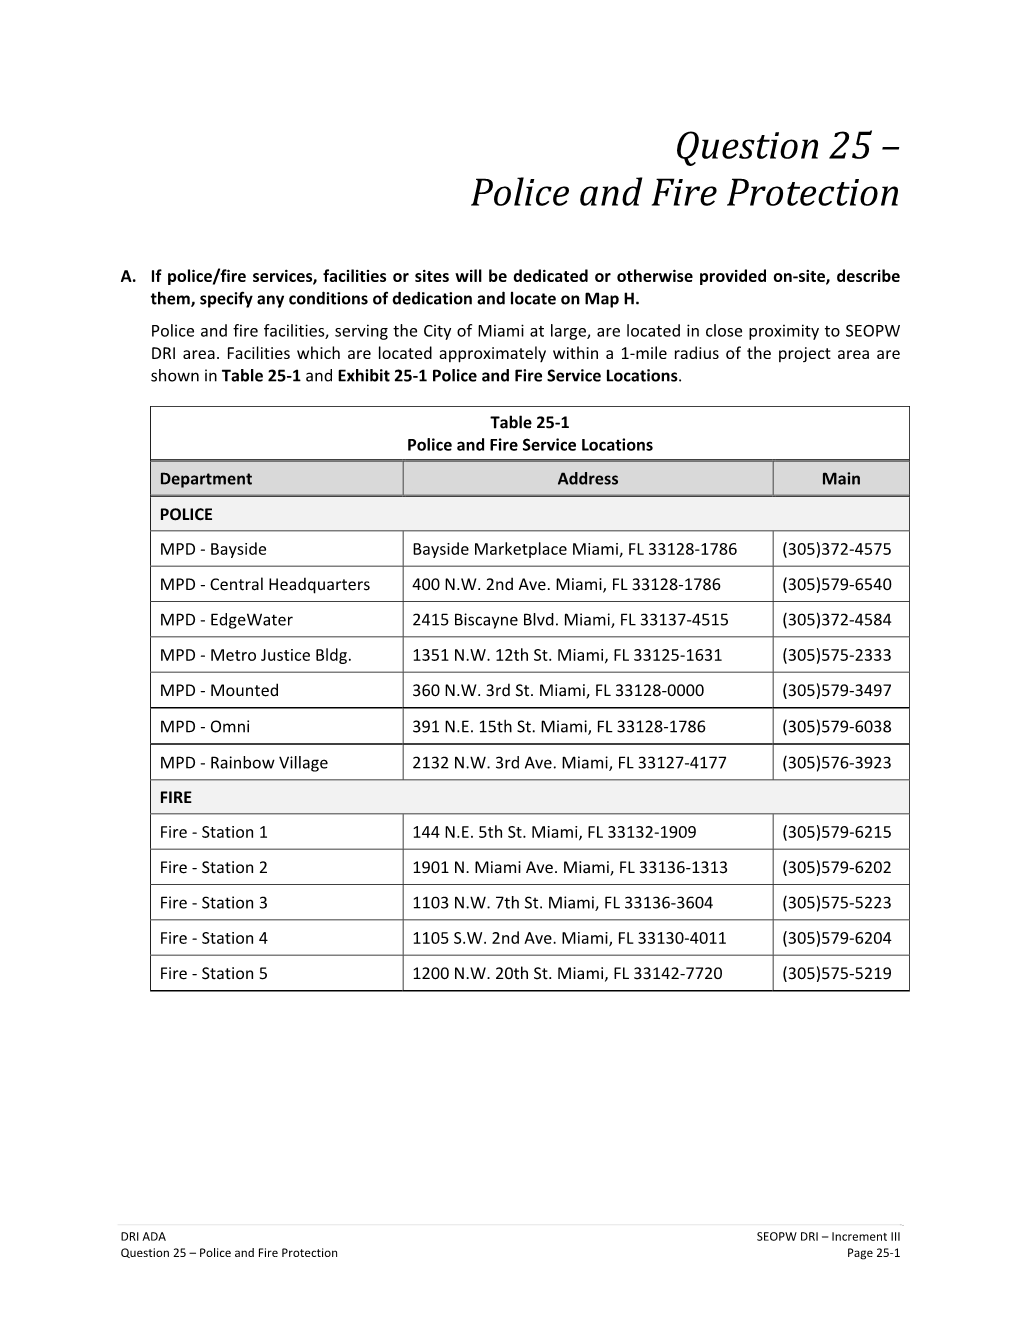 Question 25 – Police and Fire Protection